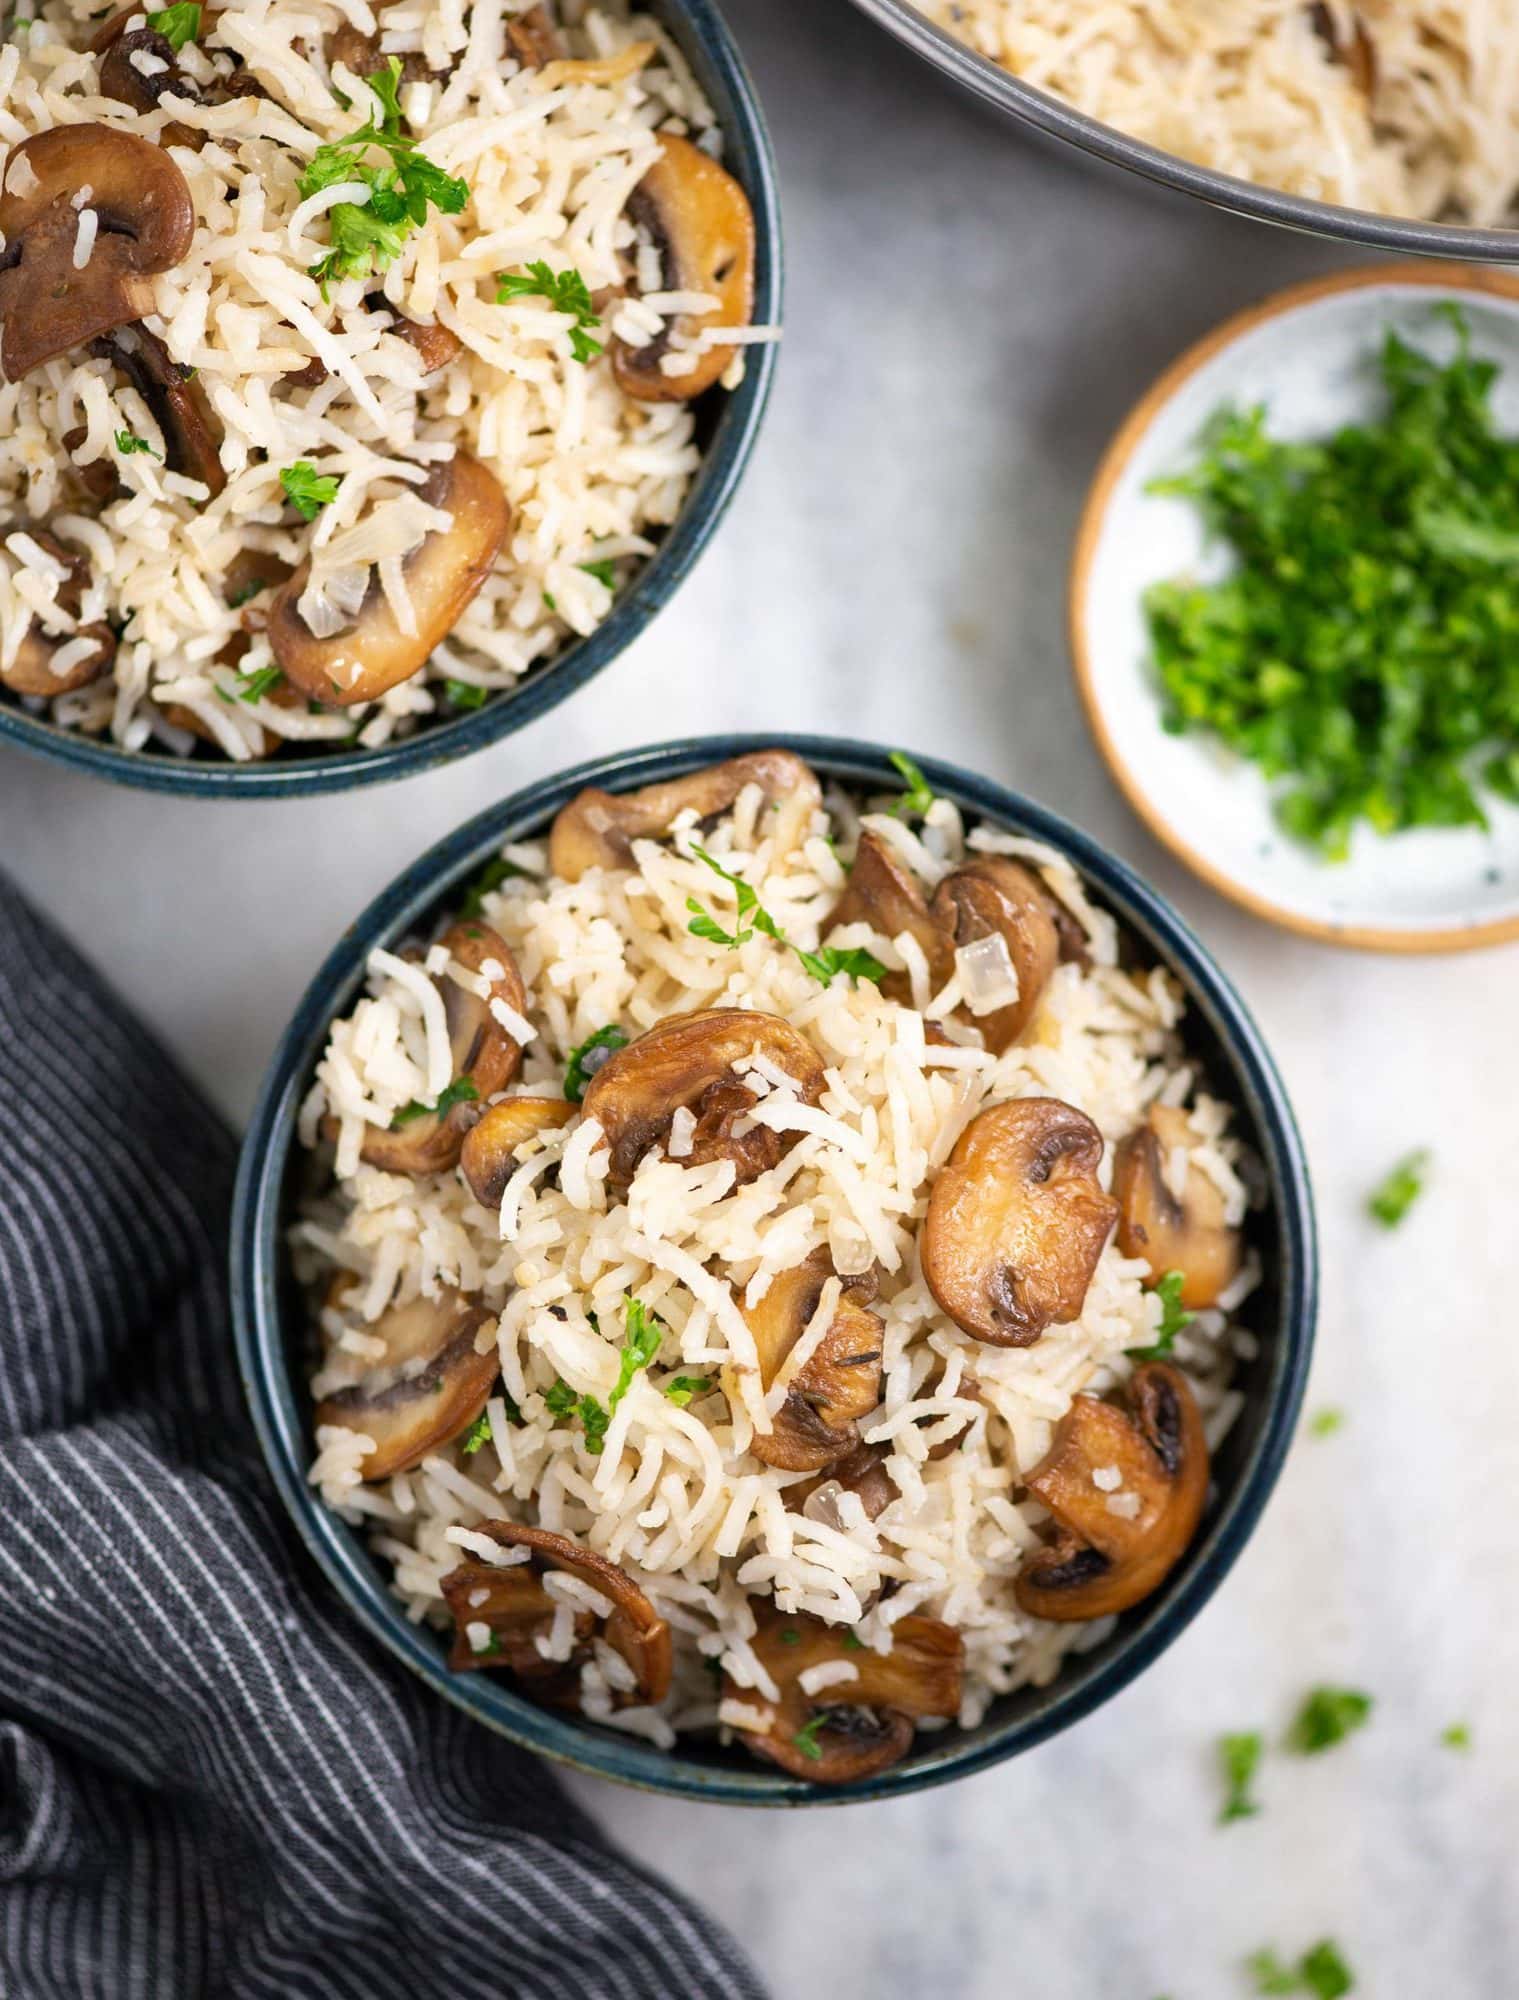 Mushroom rice or pulao or pulav serve in a bowl as a whole meal.